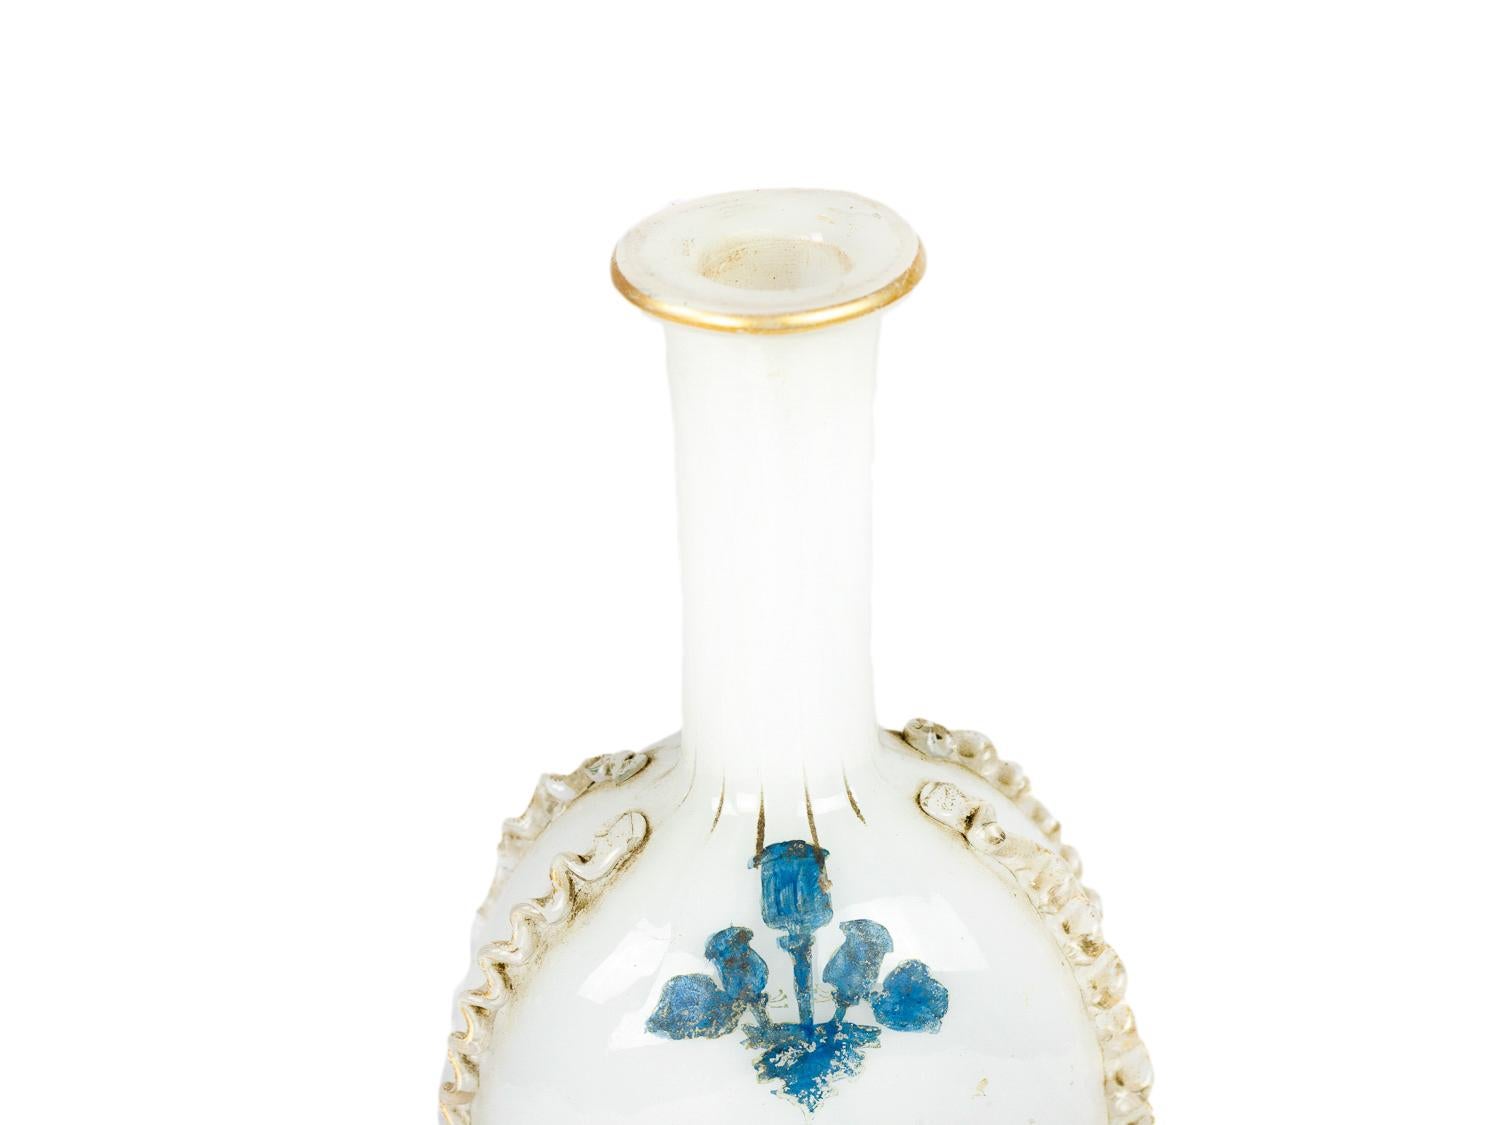 19th Century White Glass Floral Painted Vase with Ribbons by Jerome Massier In Good Condition For Sale In Lisbon, PT